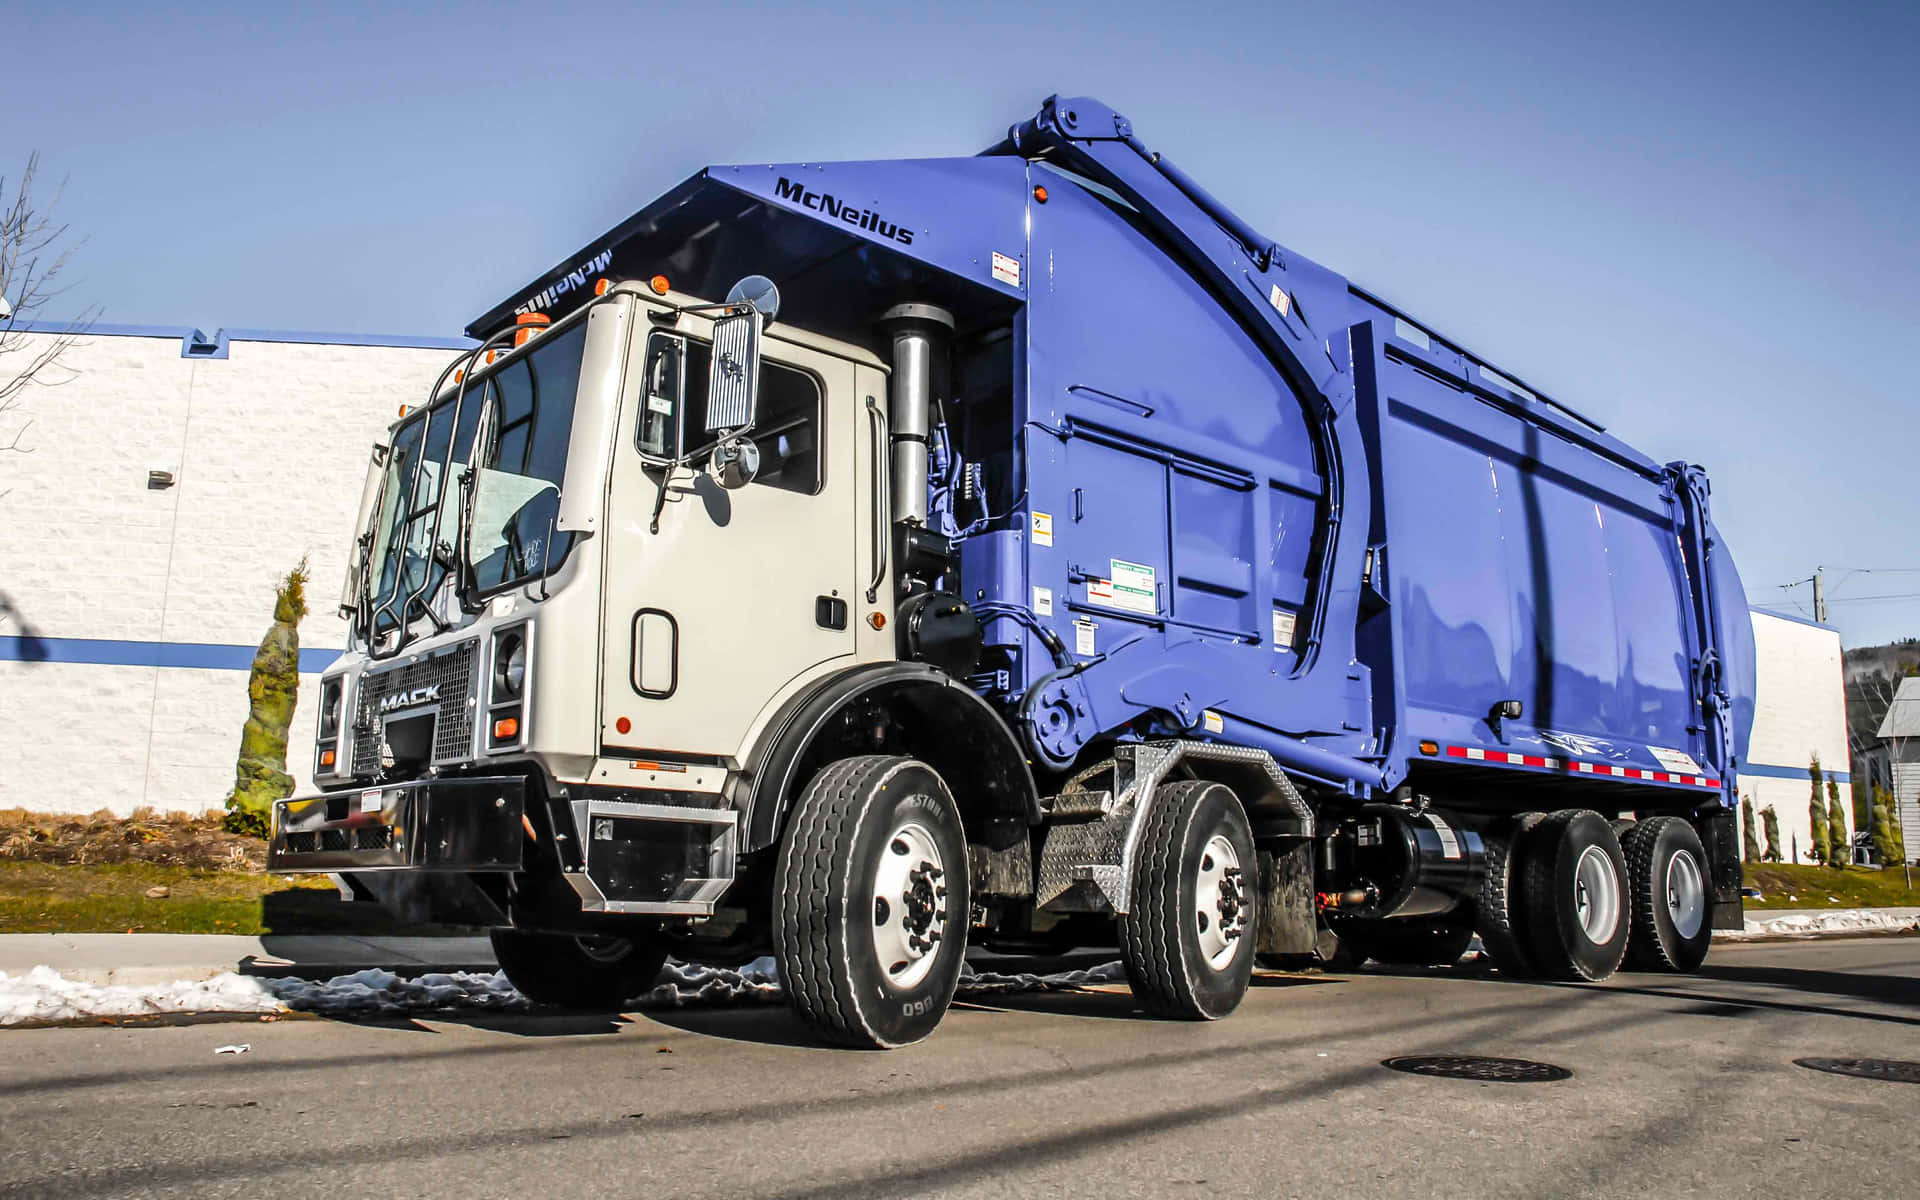 An industrial garbage truck collecting waste in a city